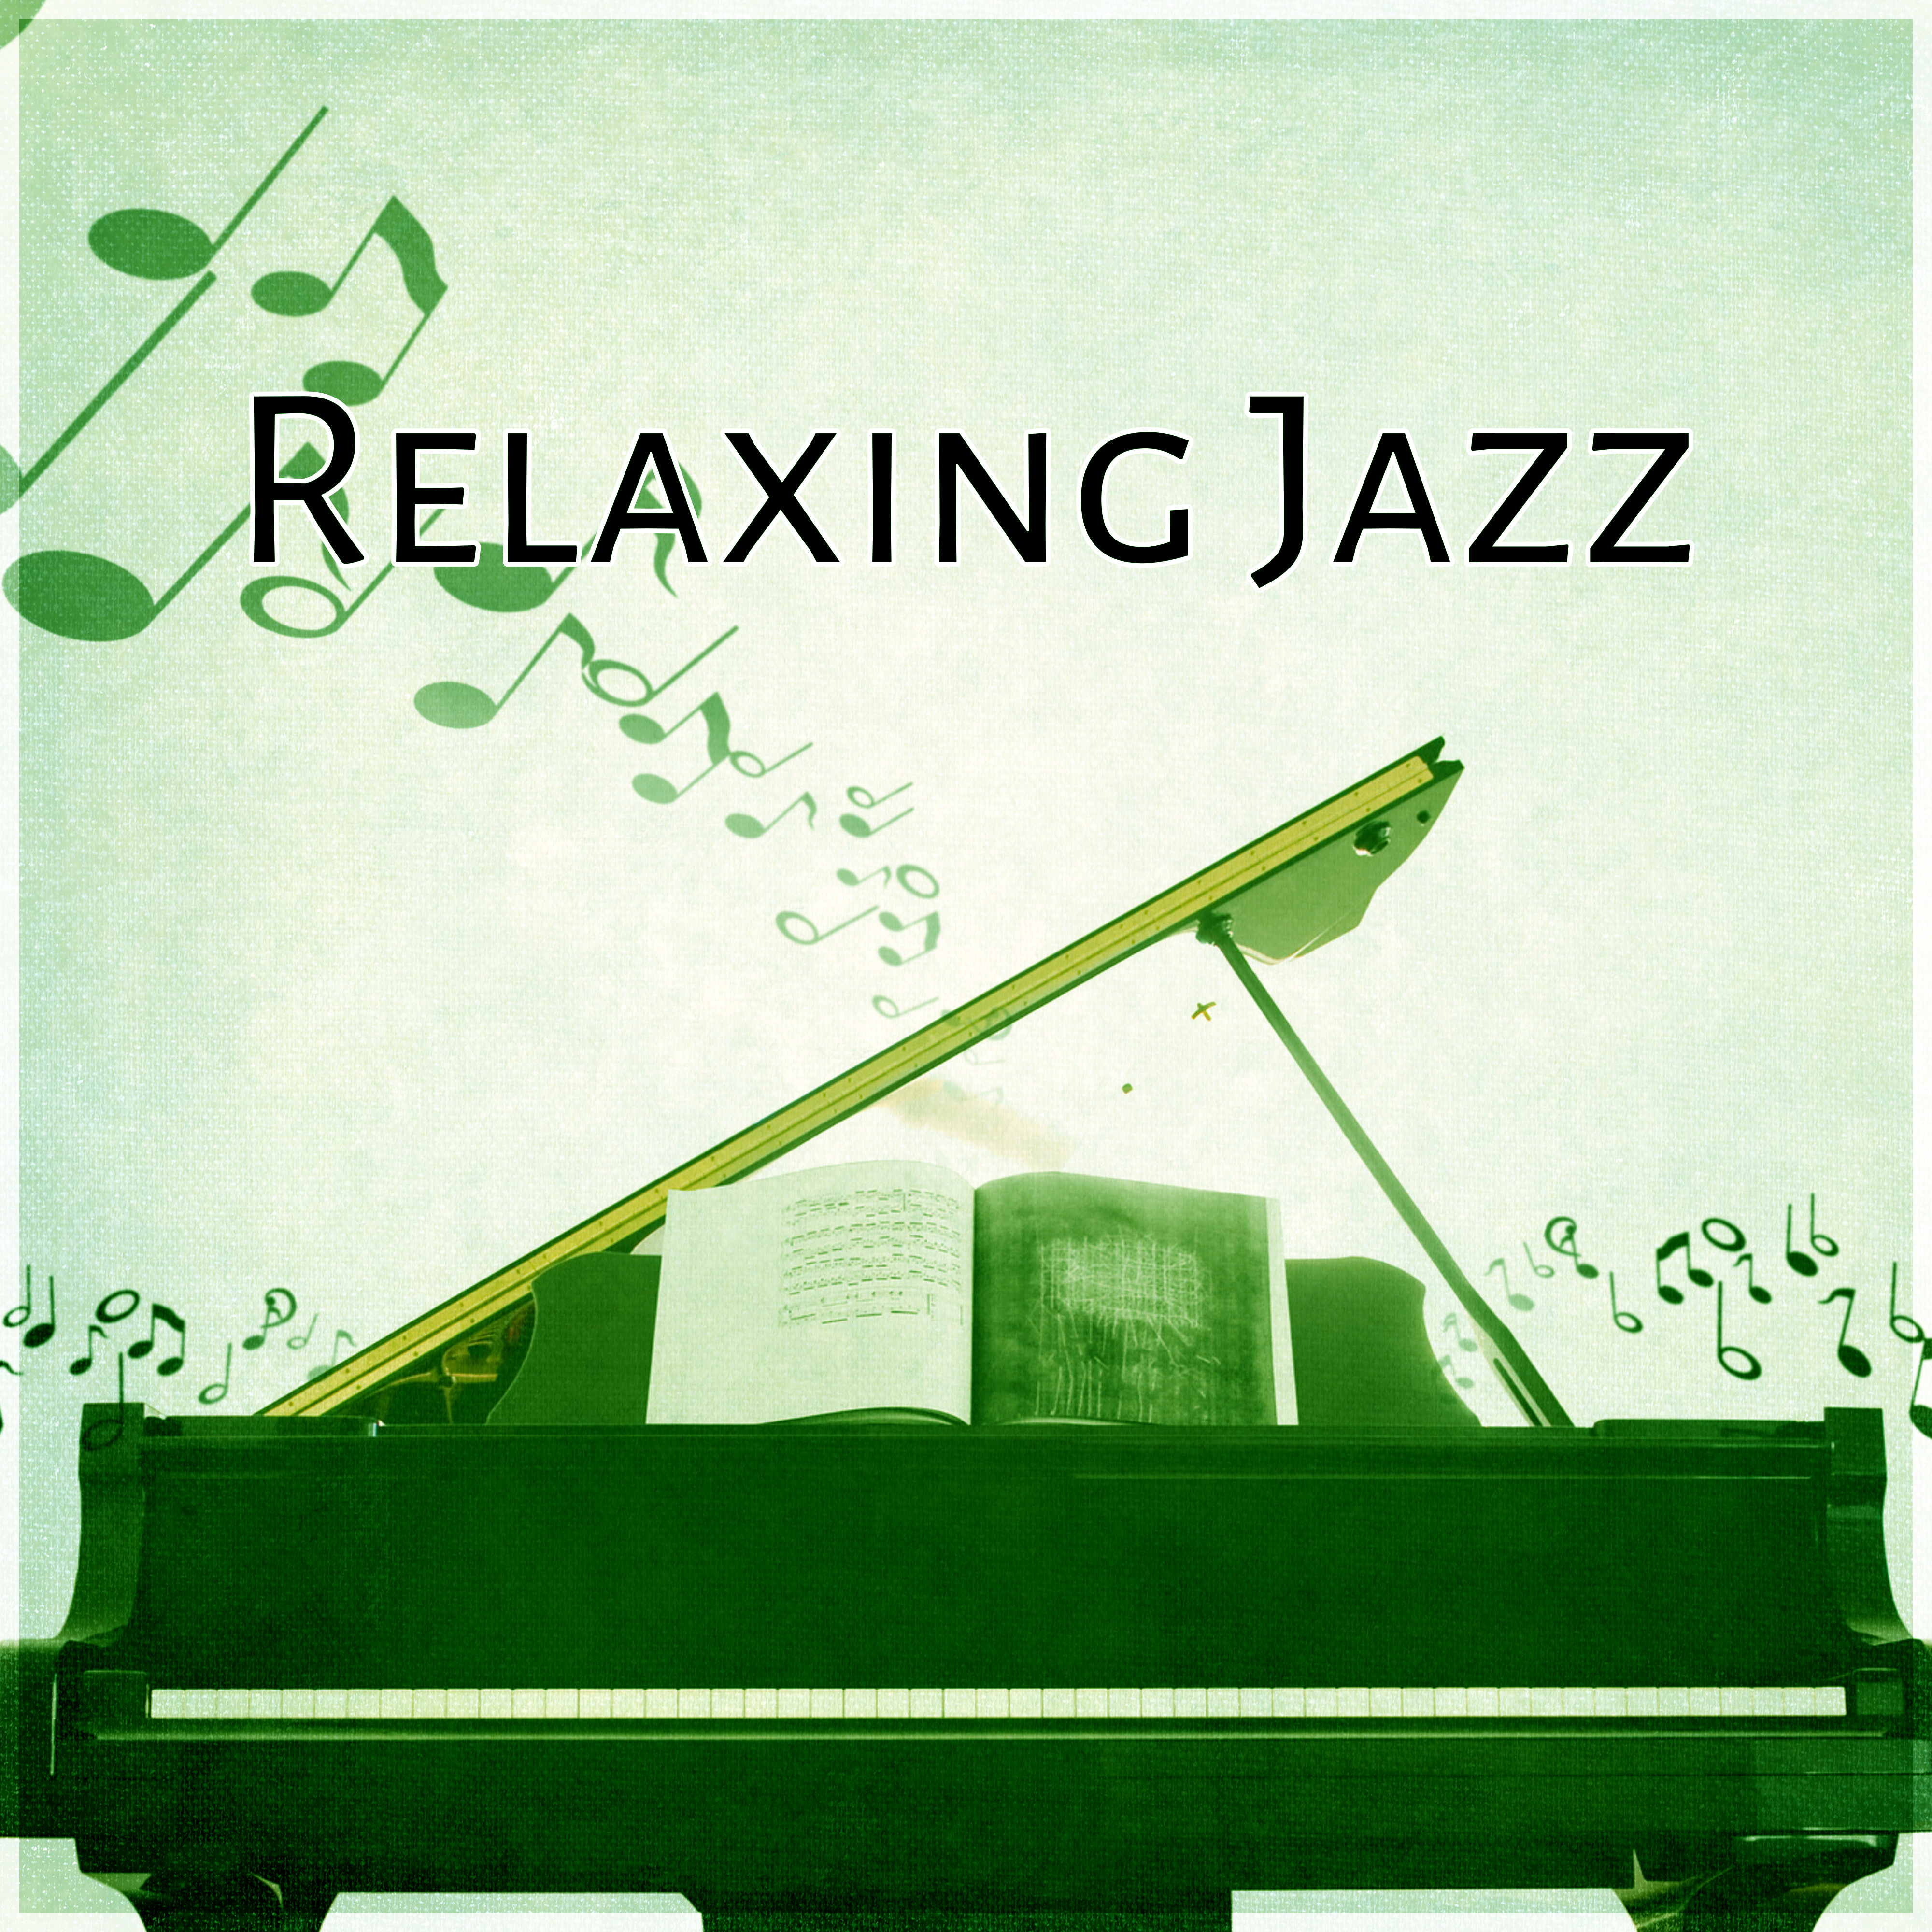 Relaxing Jazz  Soft Piano Jazz for Relaxation, Jazz All Day  Night, Smooth Jazz, Best Background Music, Piano Sounds to Relax